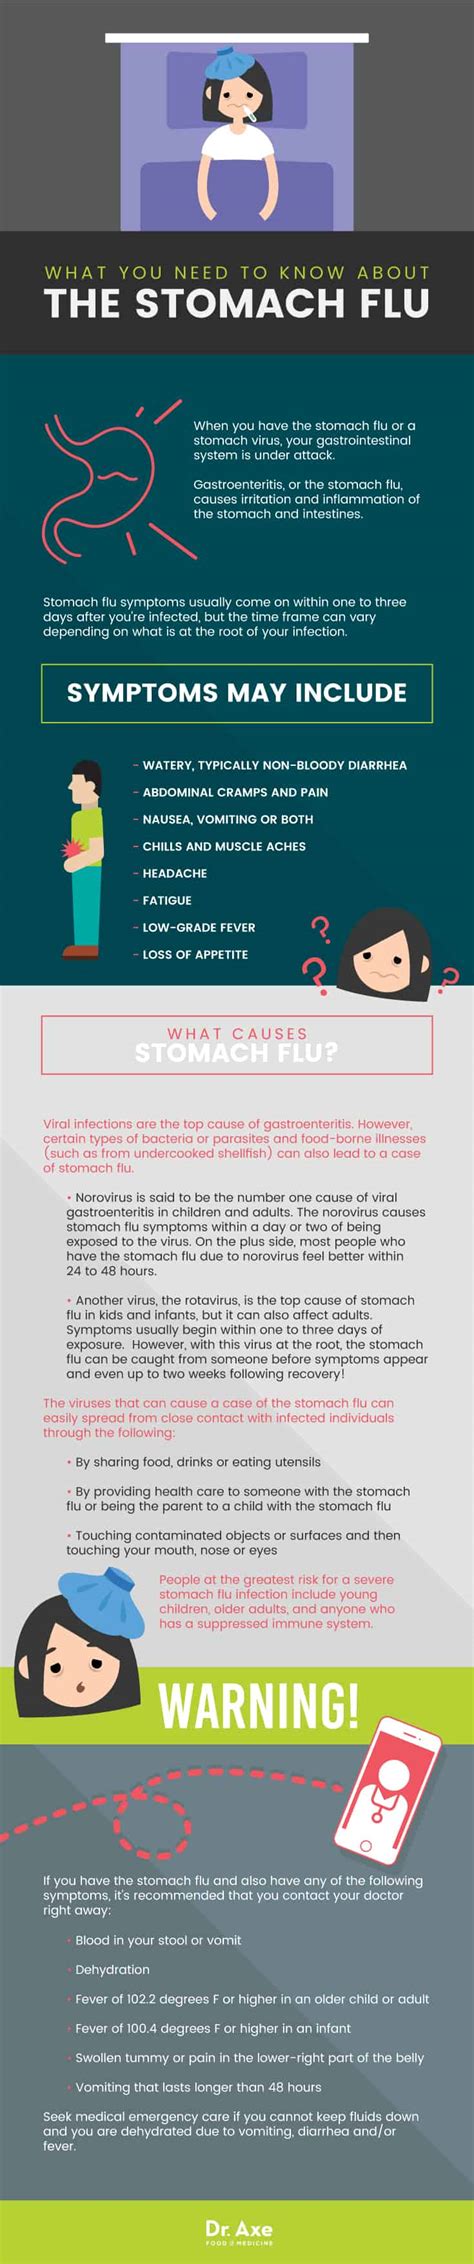 How To Get Rid Of The Stomach Flu 7 Natural Remedies Dr Axe